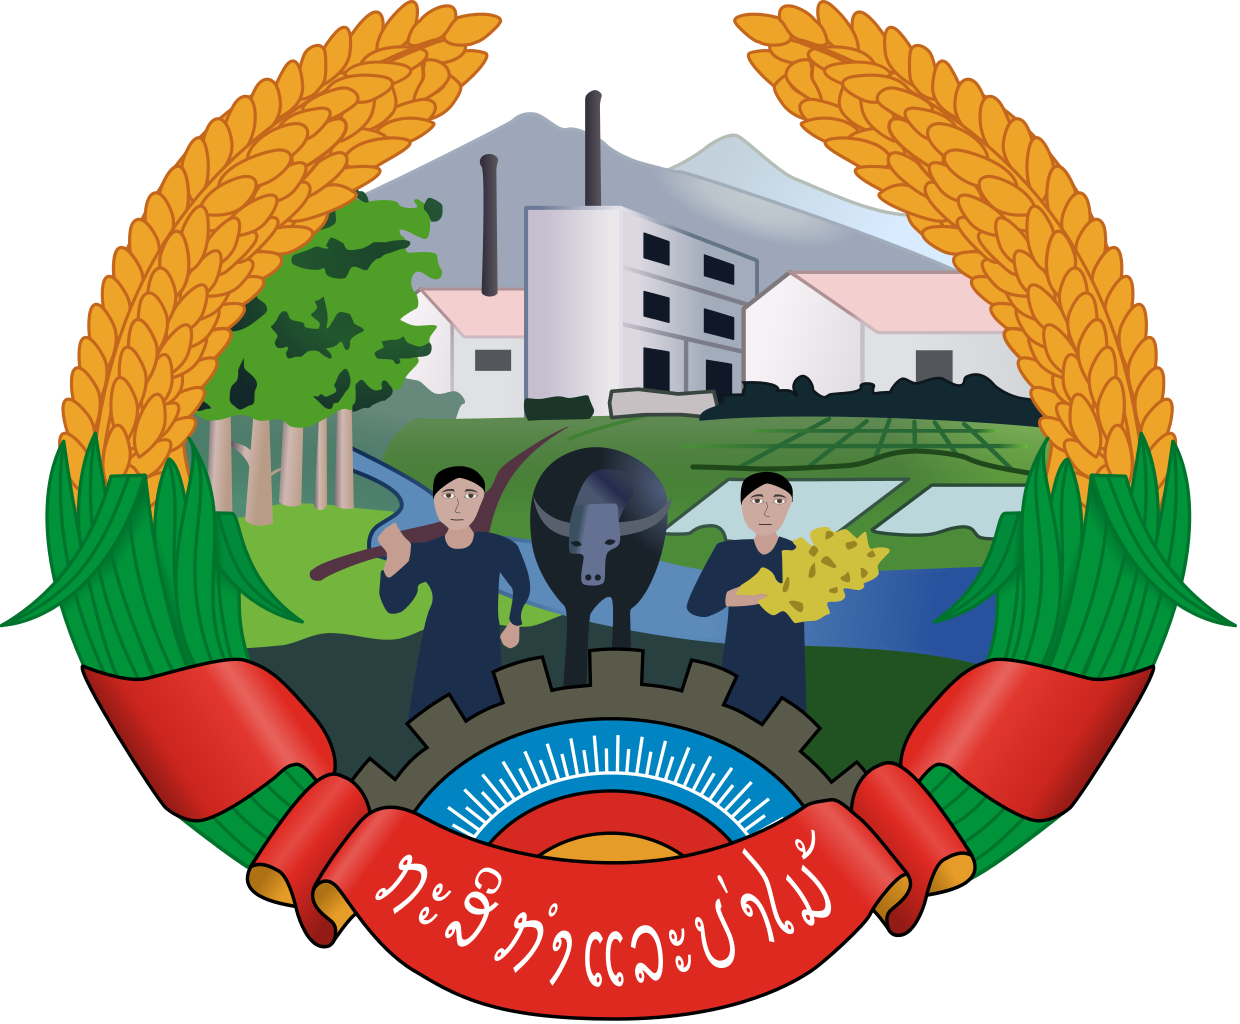 kisspng-emblem-of-laos-ministry-of-agriculture-and-forestr-agriculture-5acfd9c28f0994.0885772515235711385859 (1)